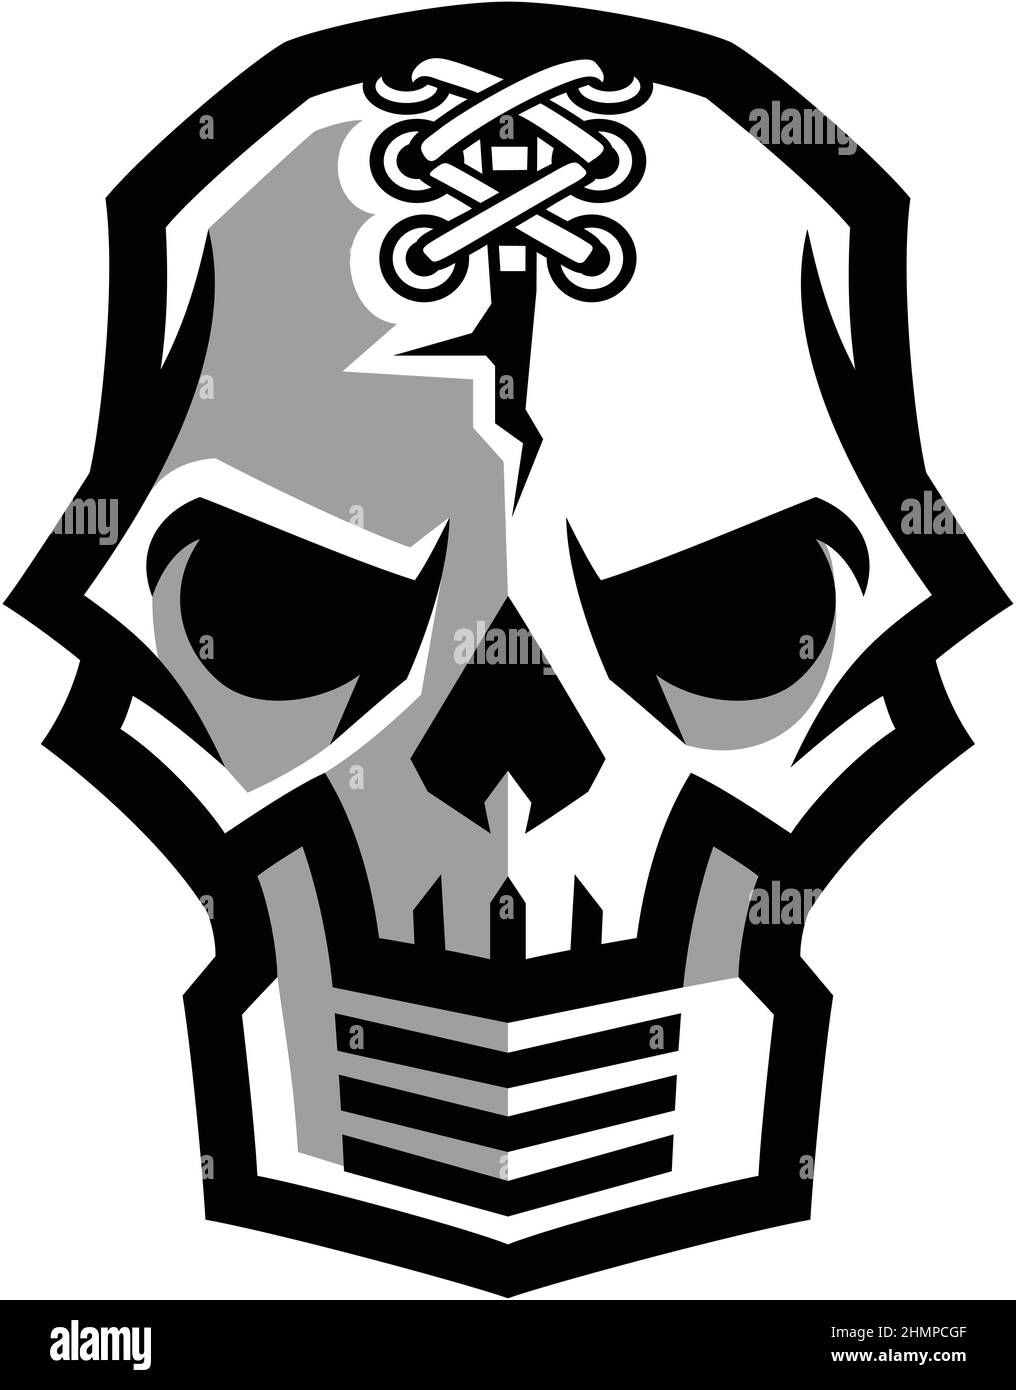 Skull with Shoelaces and Weight Vest for Runners Stock Vector